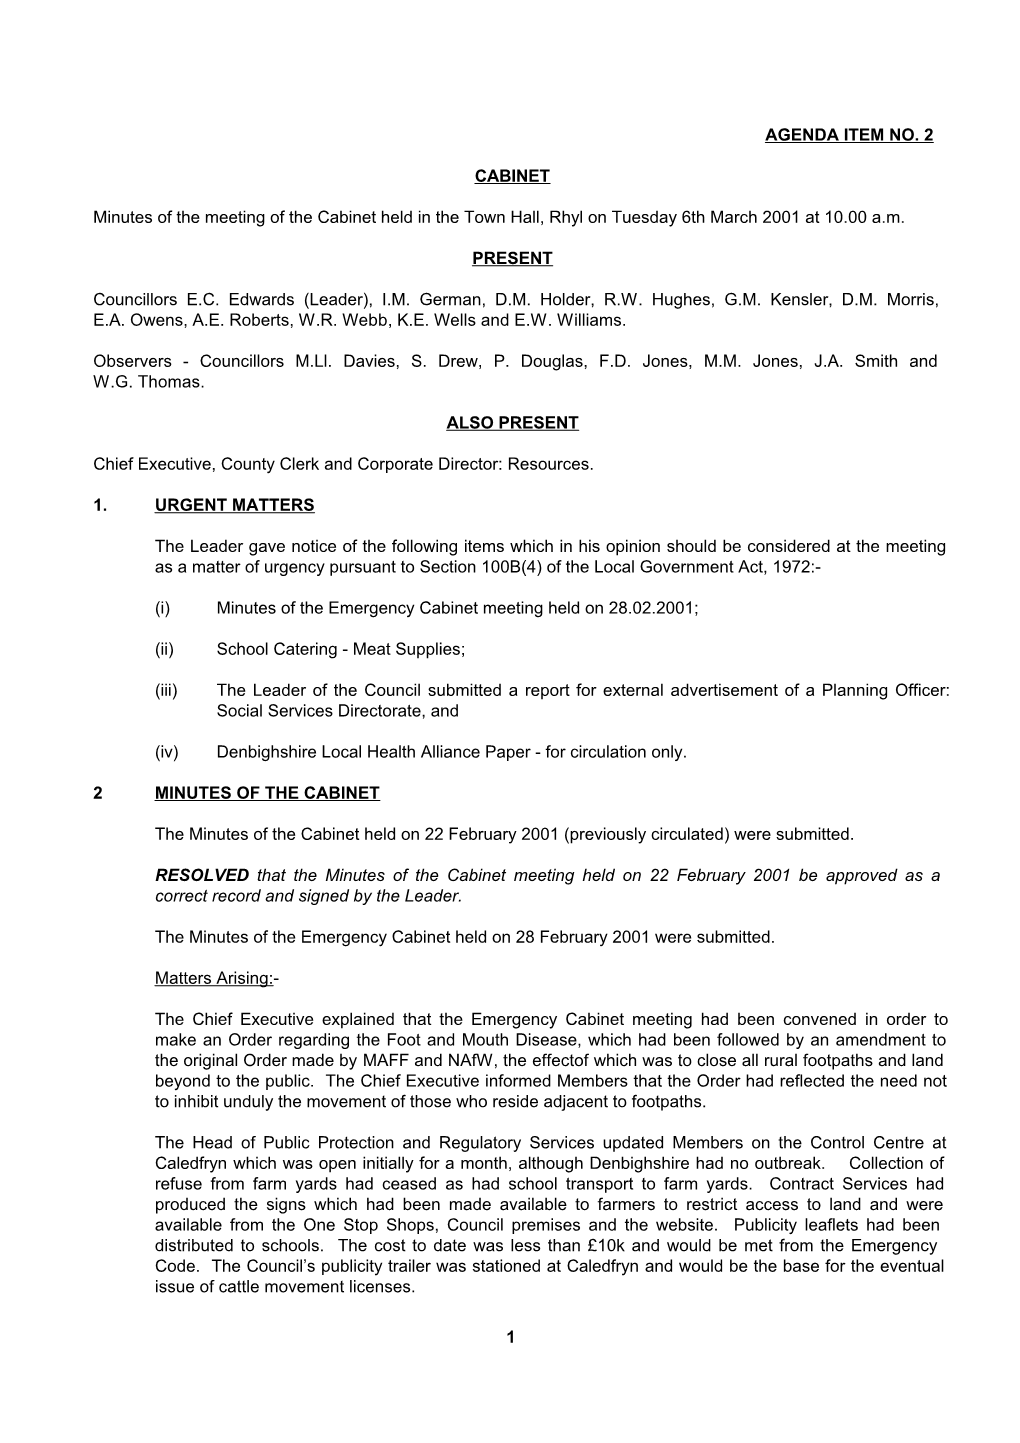 AGENDA ITEM NO. 2 CABINET Minutes of the Meeting of the Cabinet Held in the Town Hall, Rhyl on Tuesday 6Th March 2001 at 10.00 A